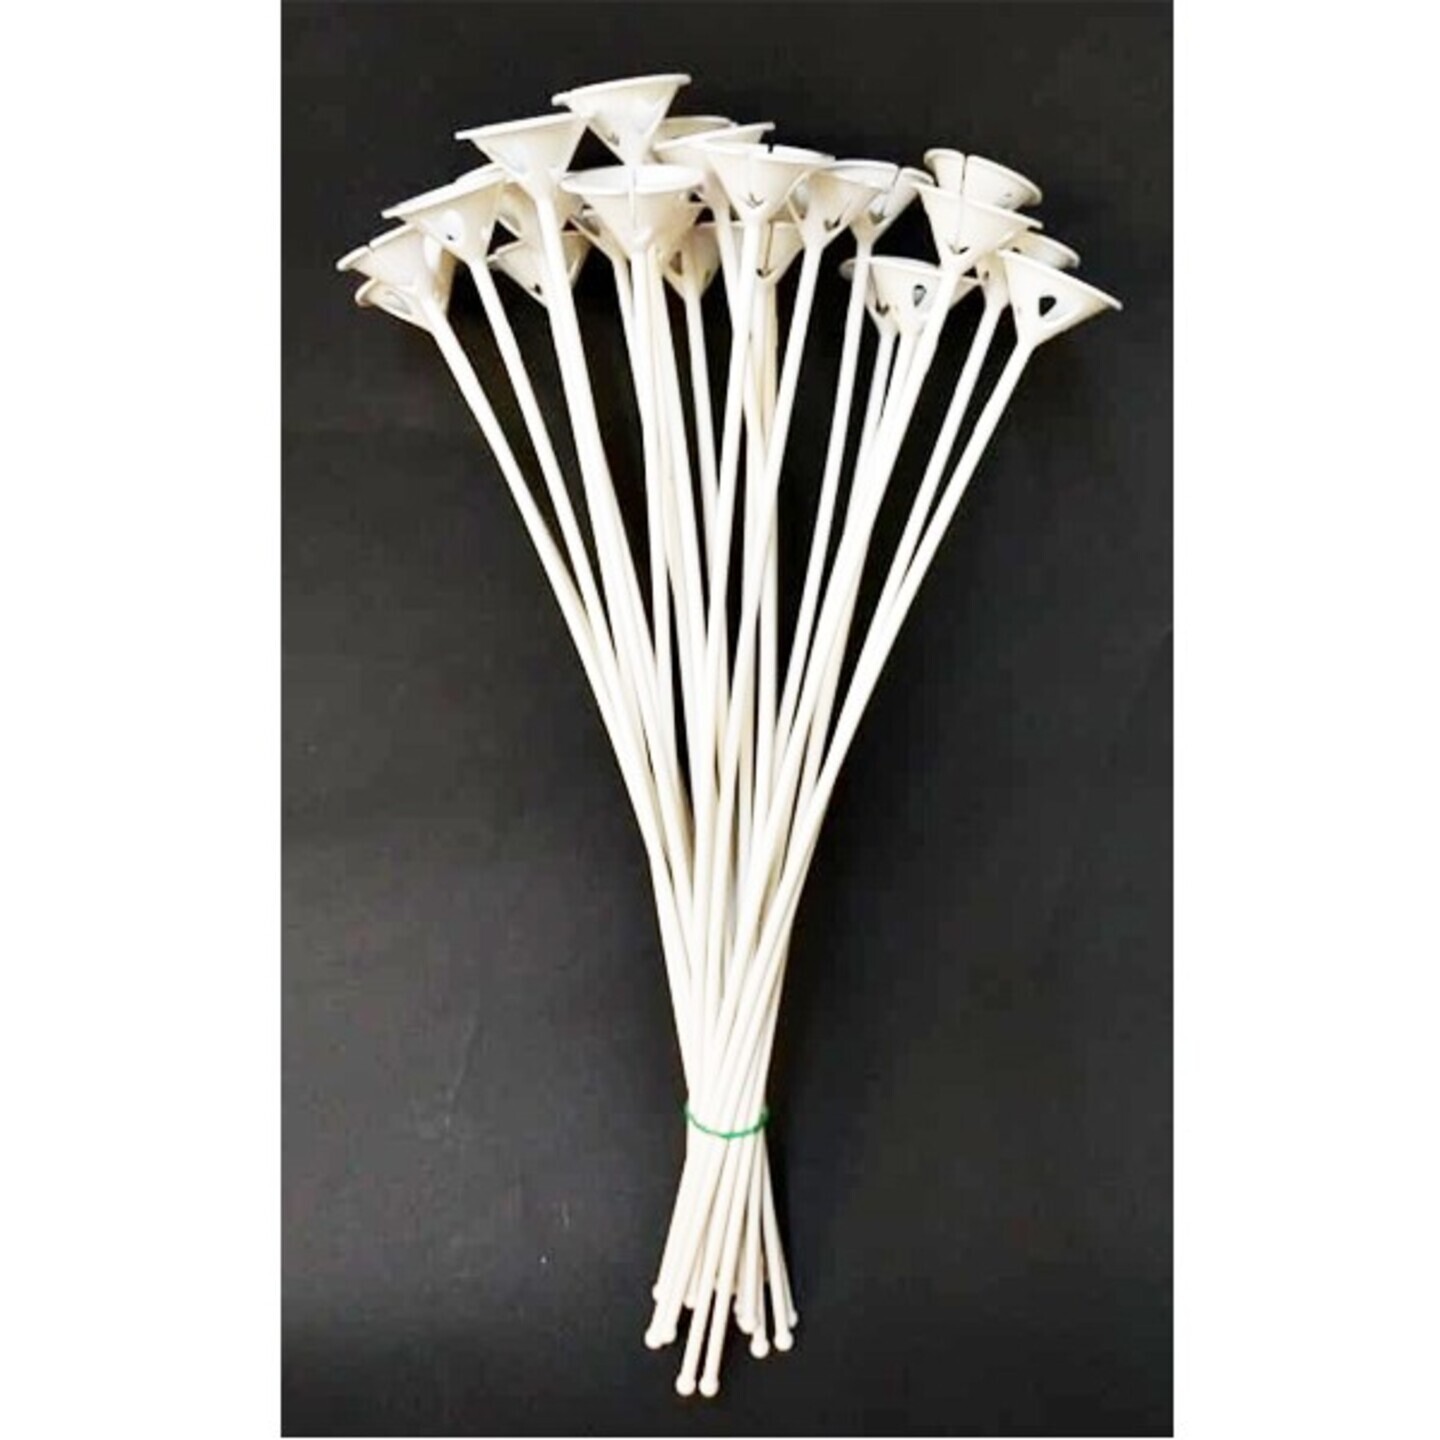 Small Balloon Sticks with Attached Cups 